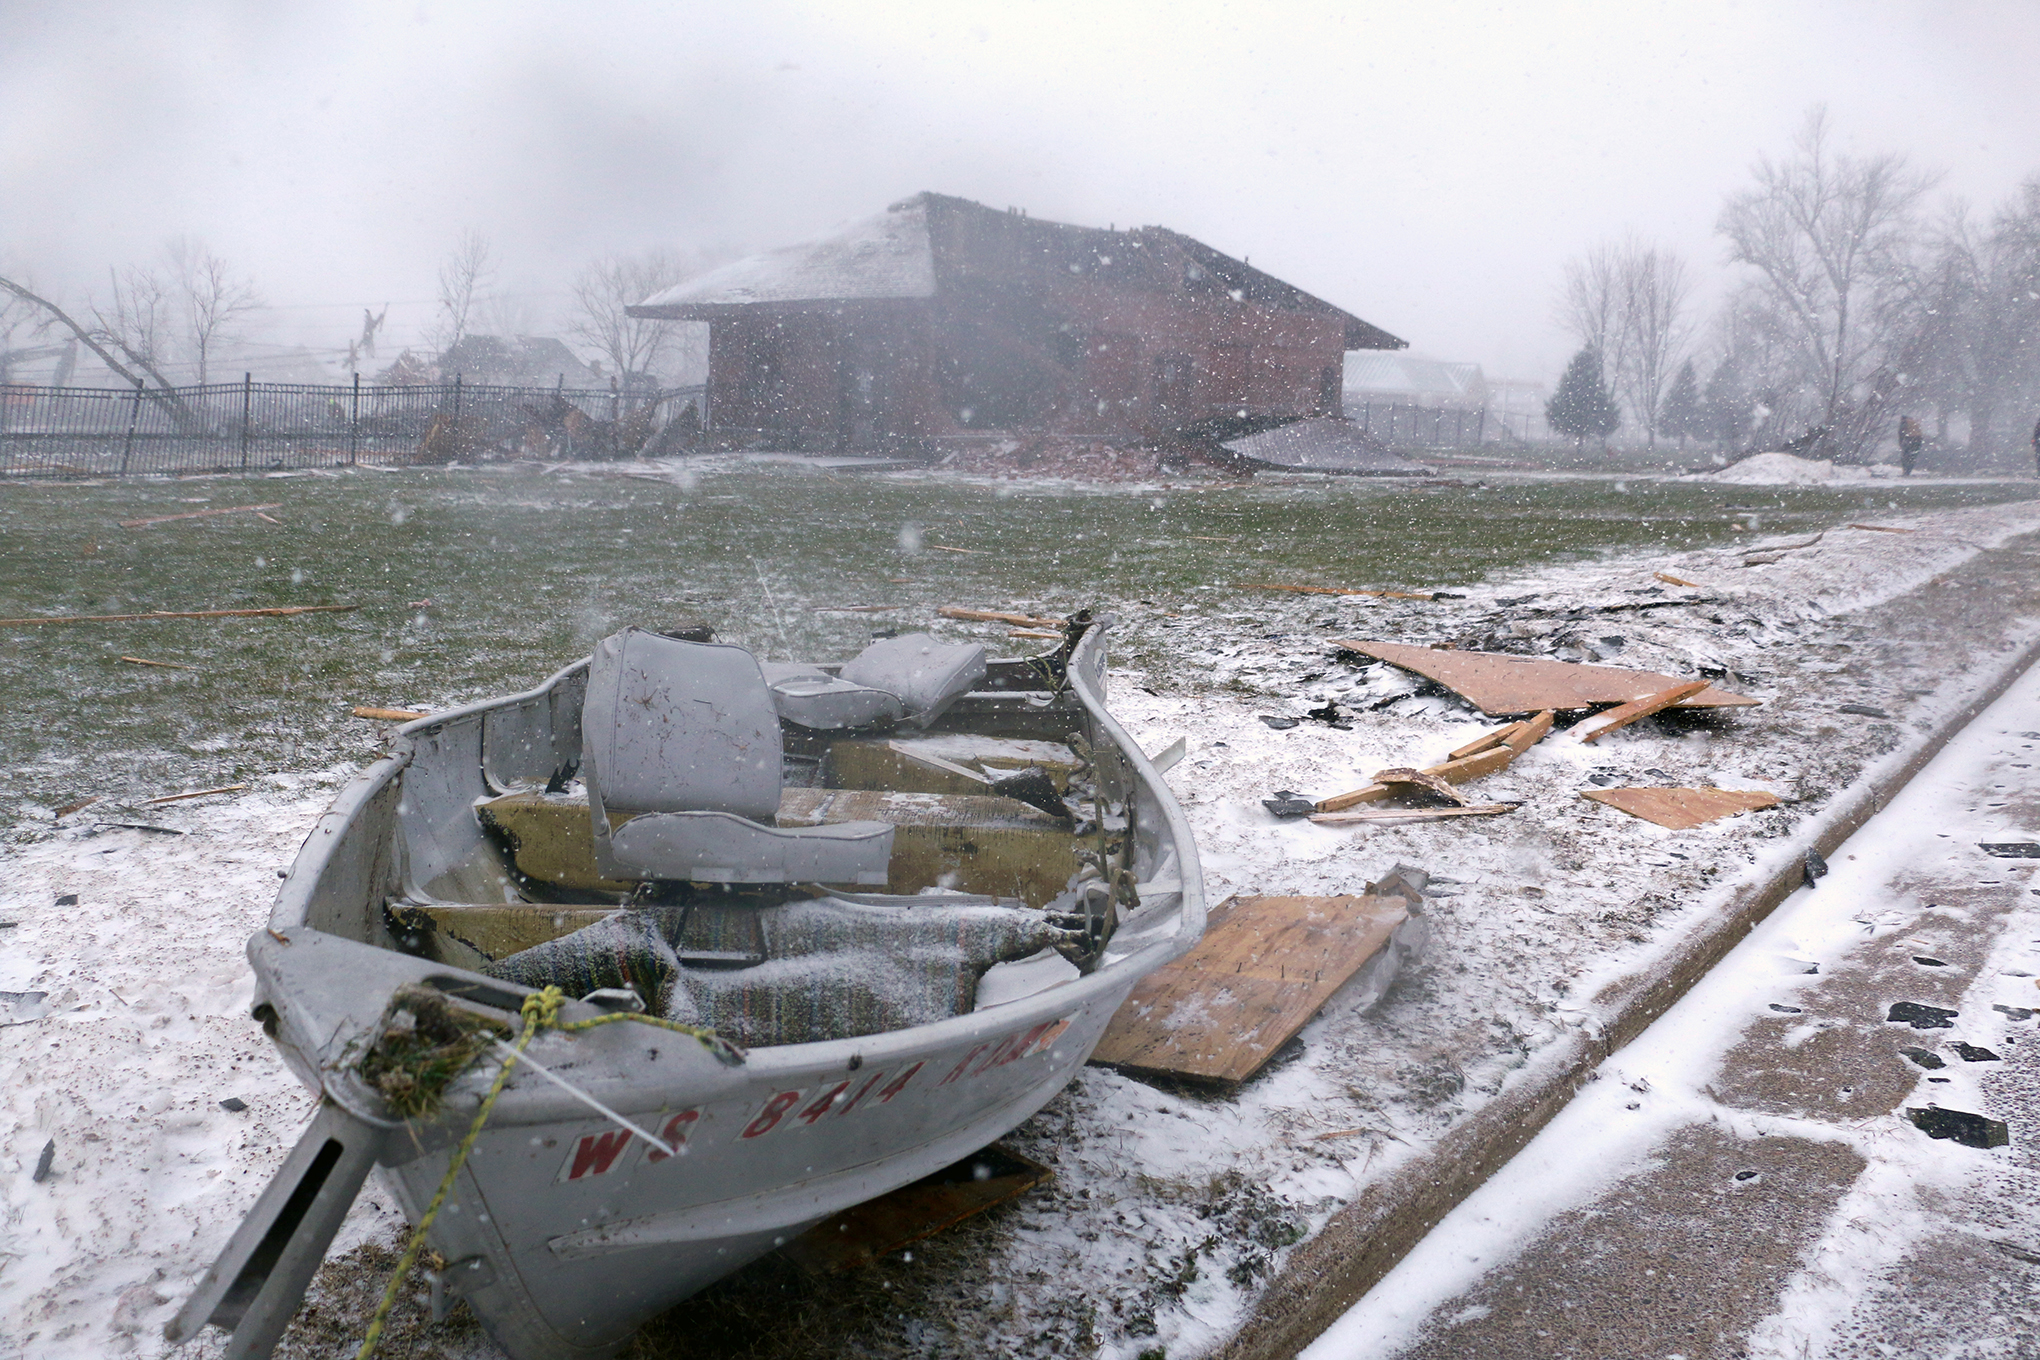 Storm damage is seen in Stanley, Wis. on Thursday, Dec. 16, 2021